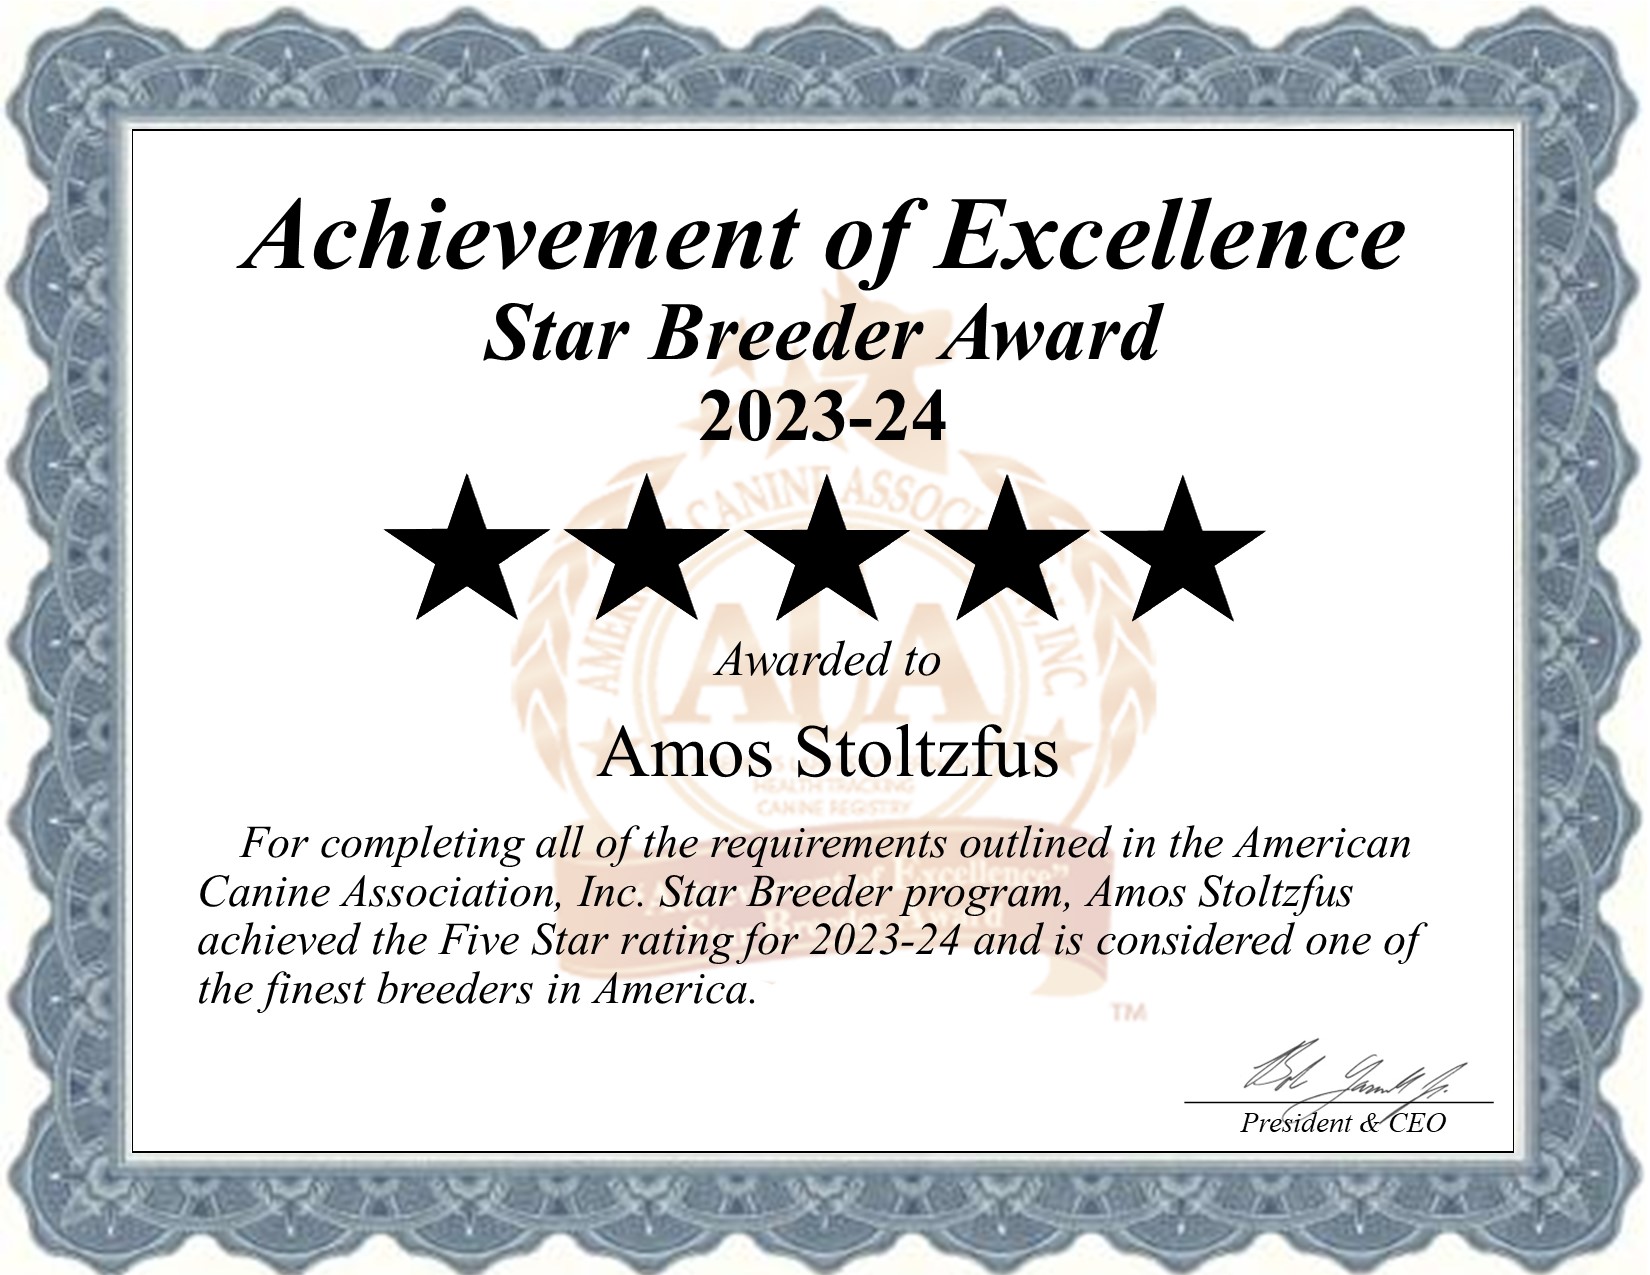 Amos, Stoltzfus, dog, breeder, star, certificate, Amos-Stoltzfus, Honey Brook, PA, Pennsylvania, puppy, dog, kennels, mill, puppymill, usda, 5-star, aca, ica, registered, King Charles Cavaliers, none